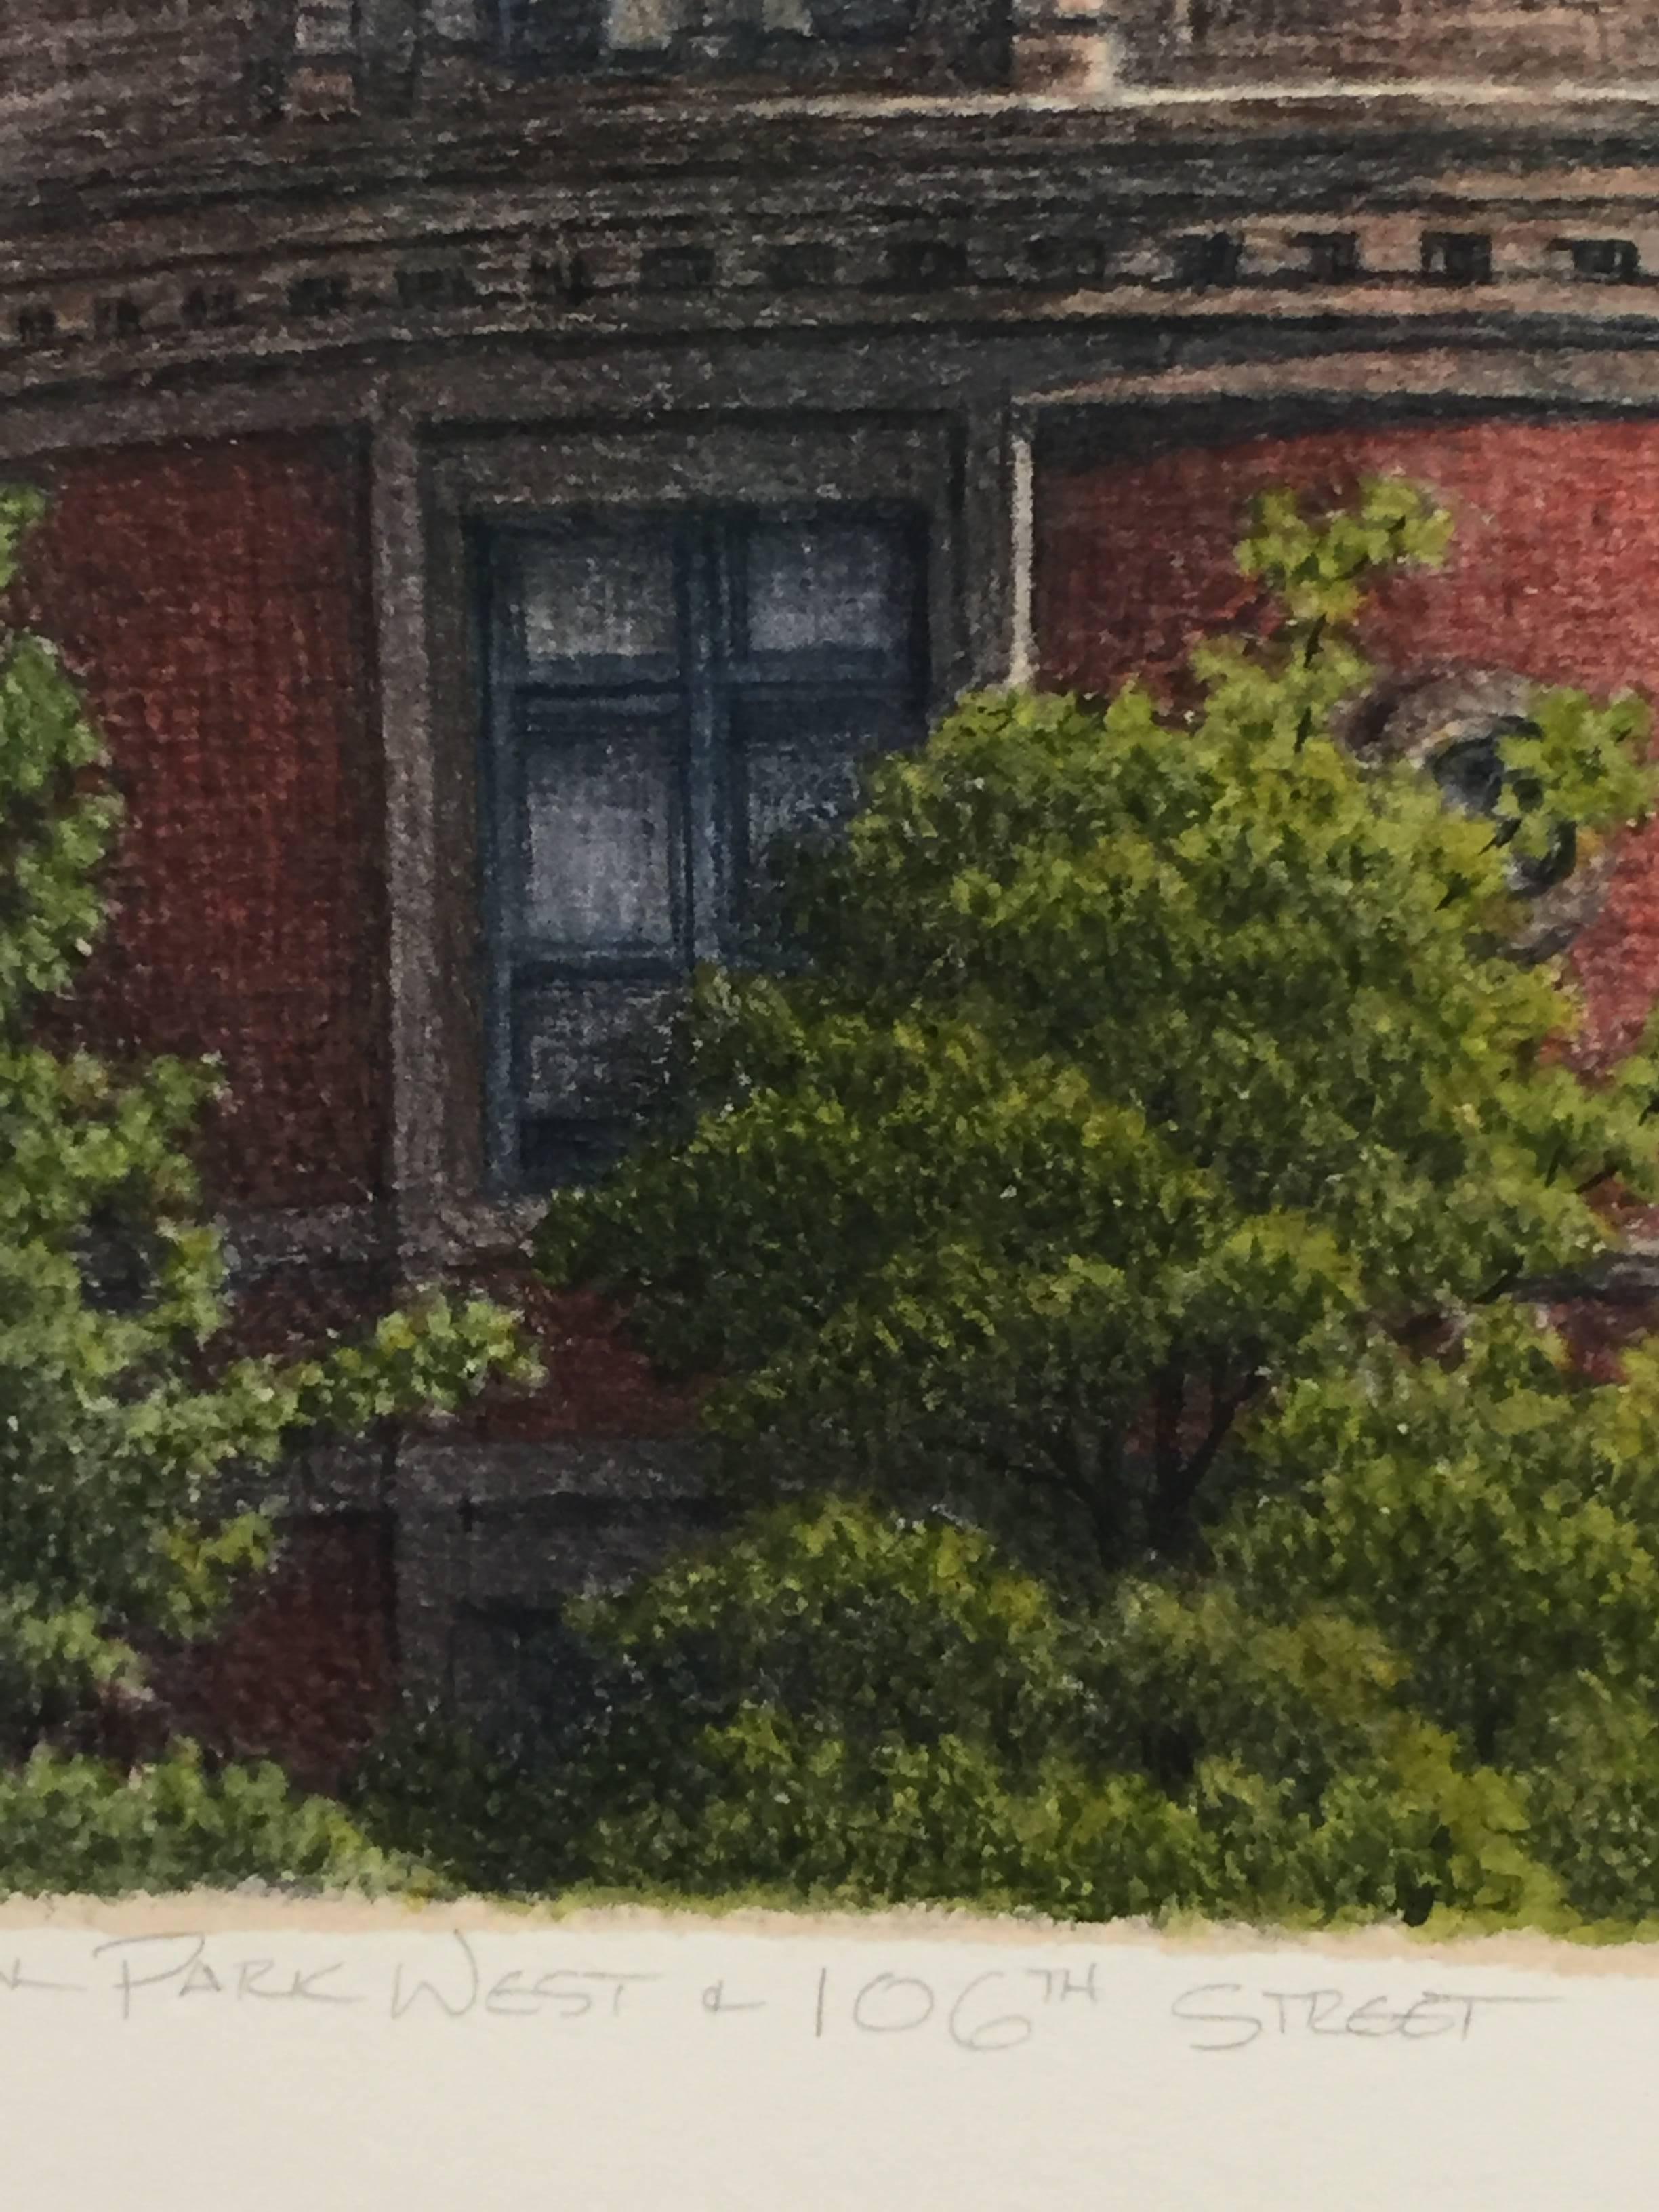 Frederick Brosen, Central Park West at 106th Street, Realist watercolor painting 1